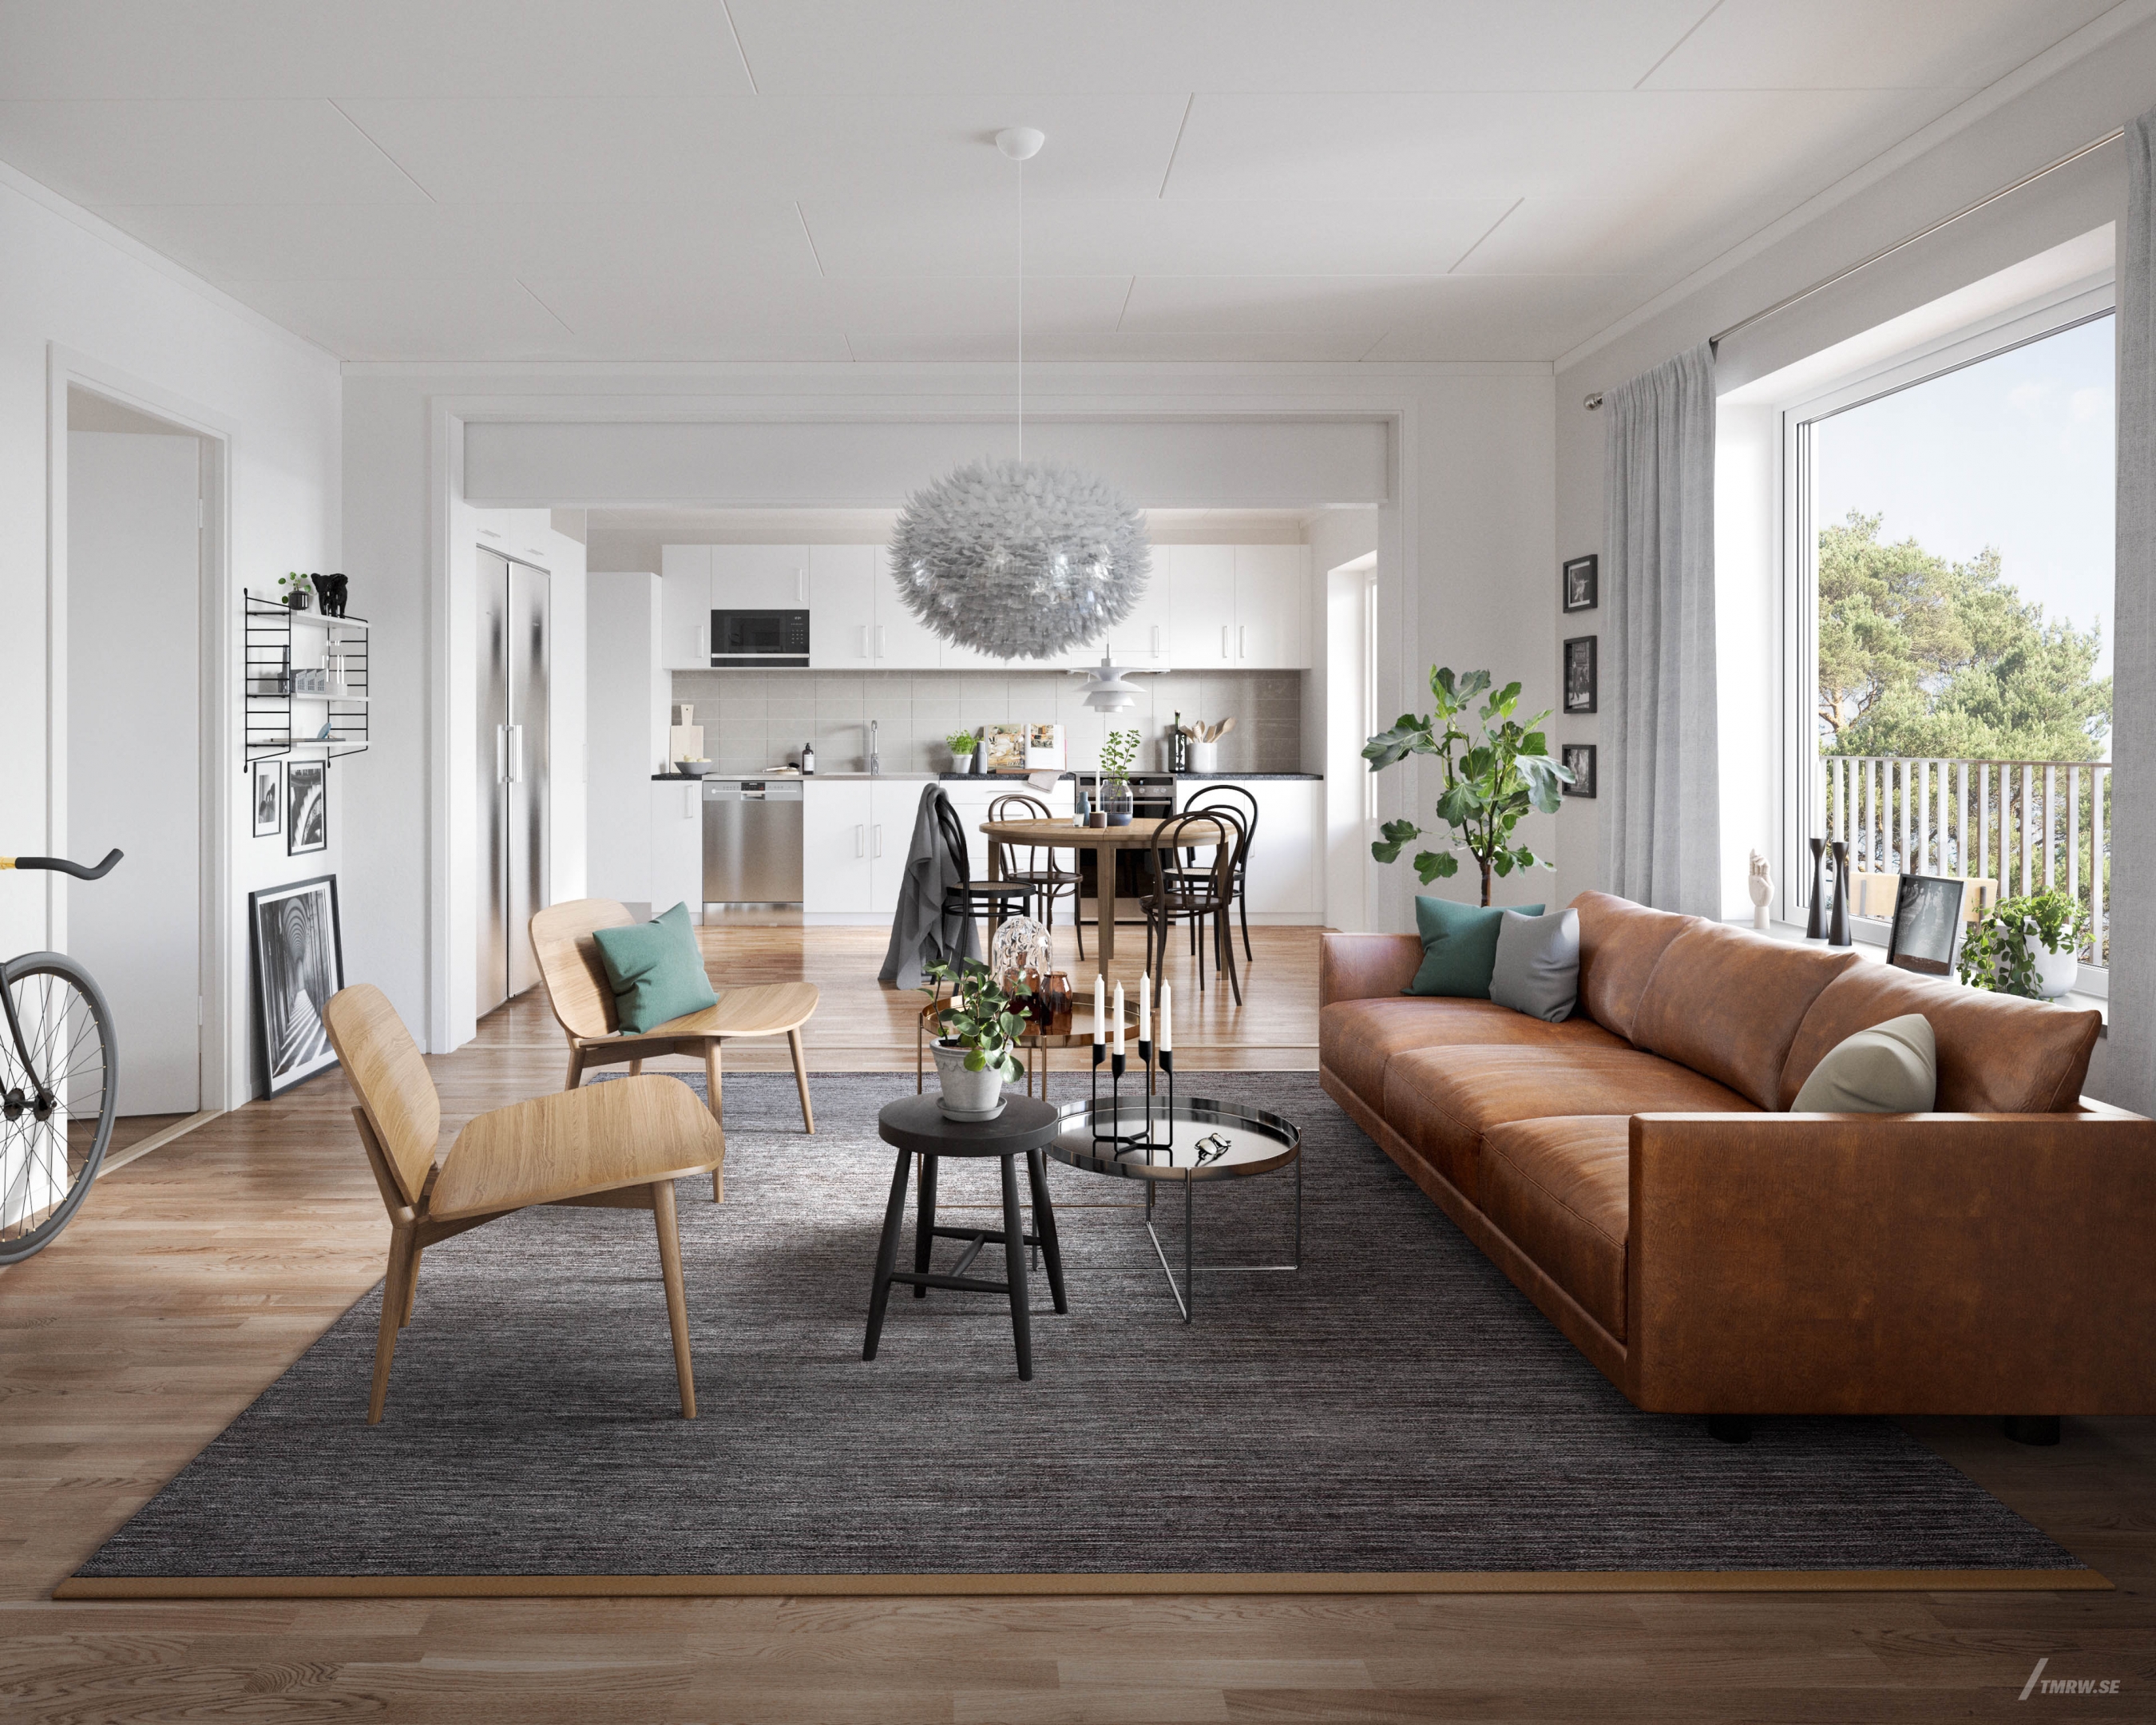 Architectural visualization of Lodge for TB Gruppen a apartment livingroom in day light form an interior view.